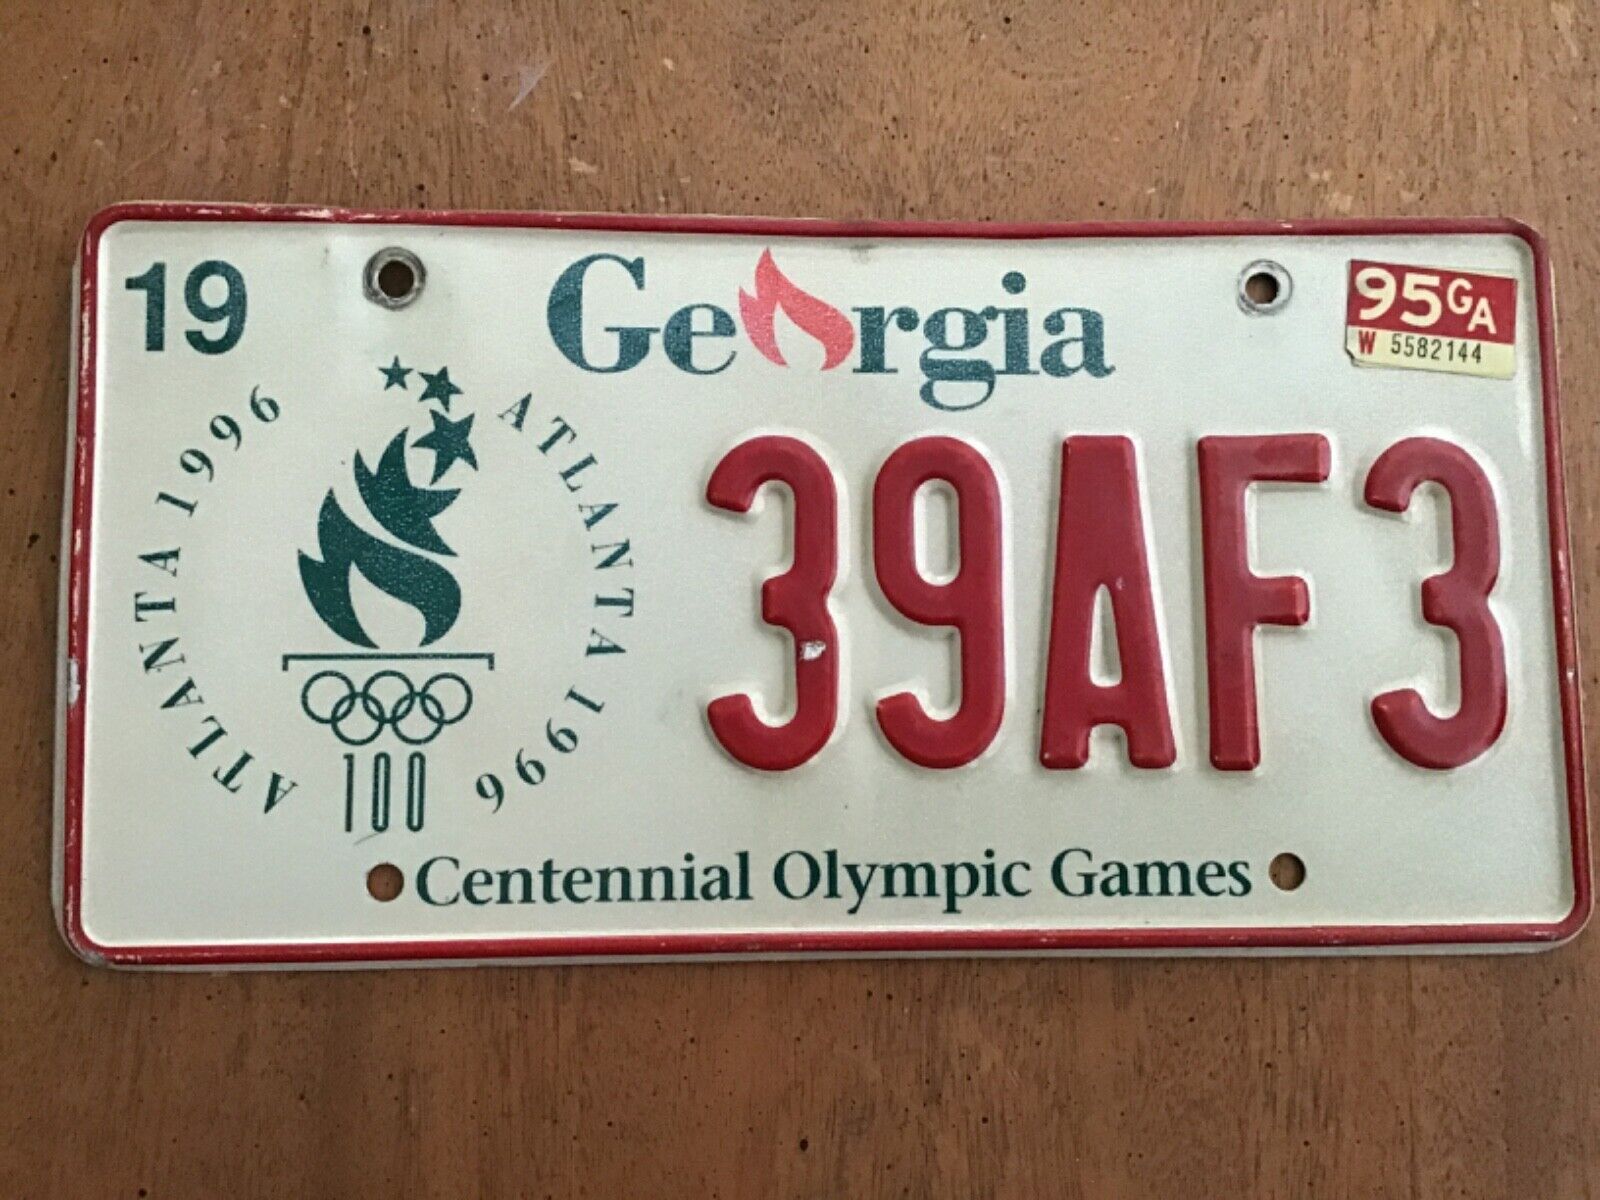 1995 Georgia Centennial Olympics Games 1996 License Plate Tag 39AF3 specialty